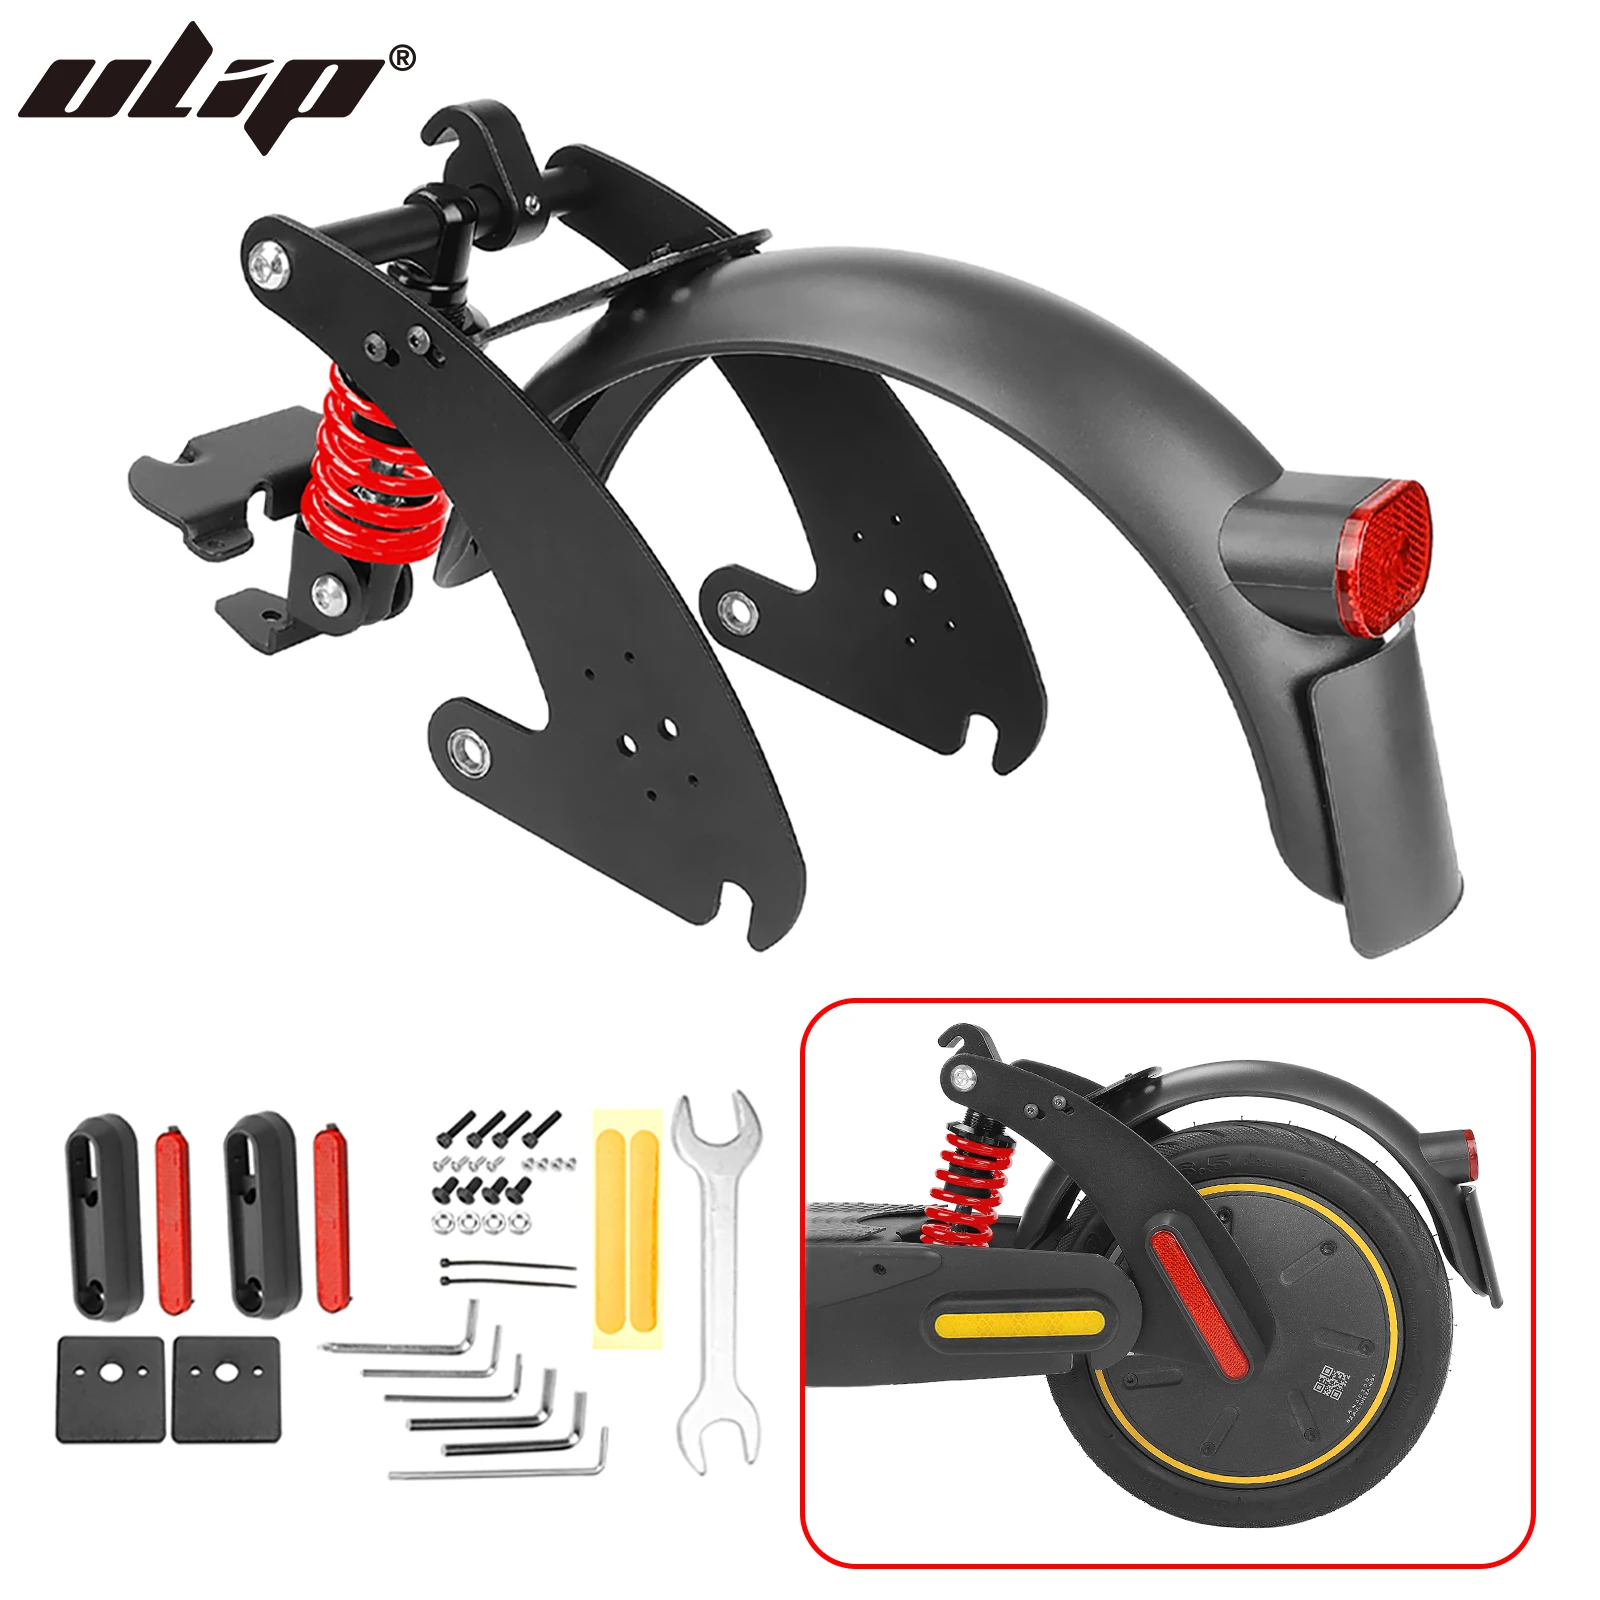 

Ulip Scooter Upgraded Rear Suspension Absorber Kit Rear Shock Absorber & Mudguard TailLight Parts For Ninebot Max G30 G30D G30LP